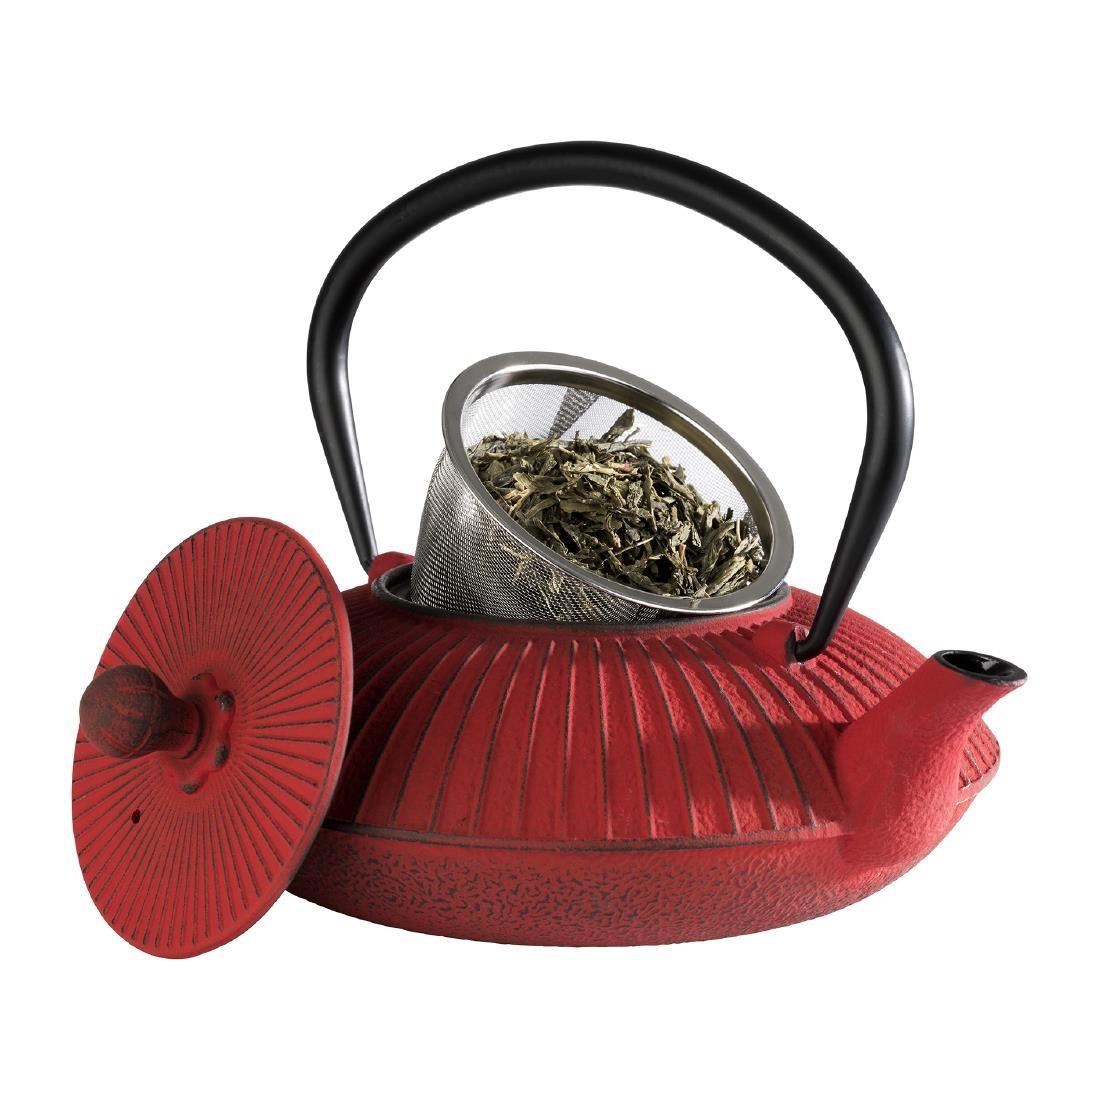 APS Asia Teapot Red 195 x 180mm - FT142  - 2